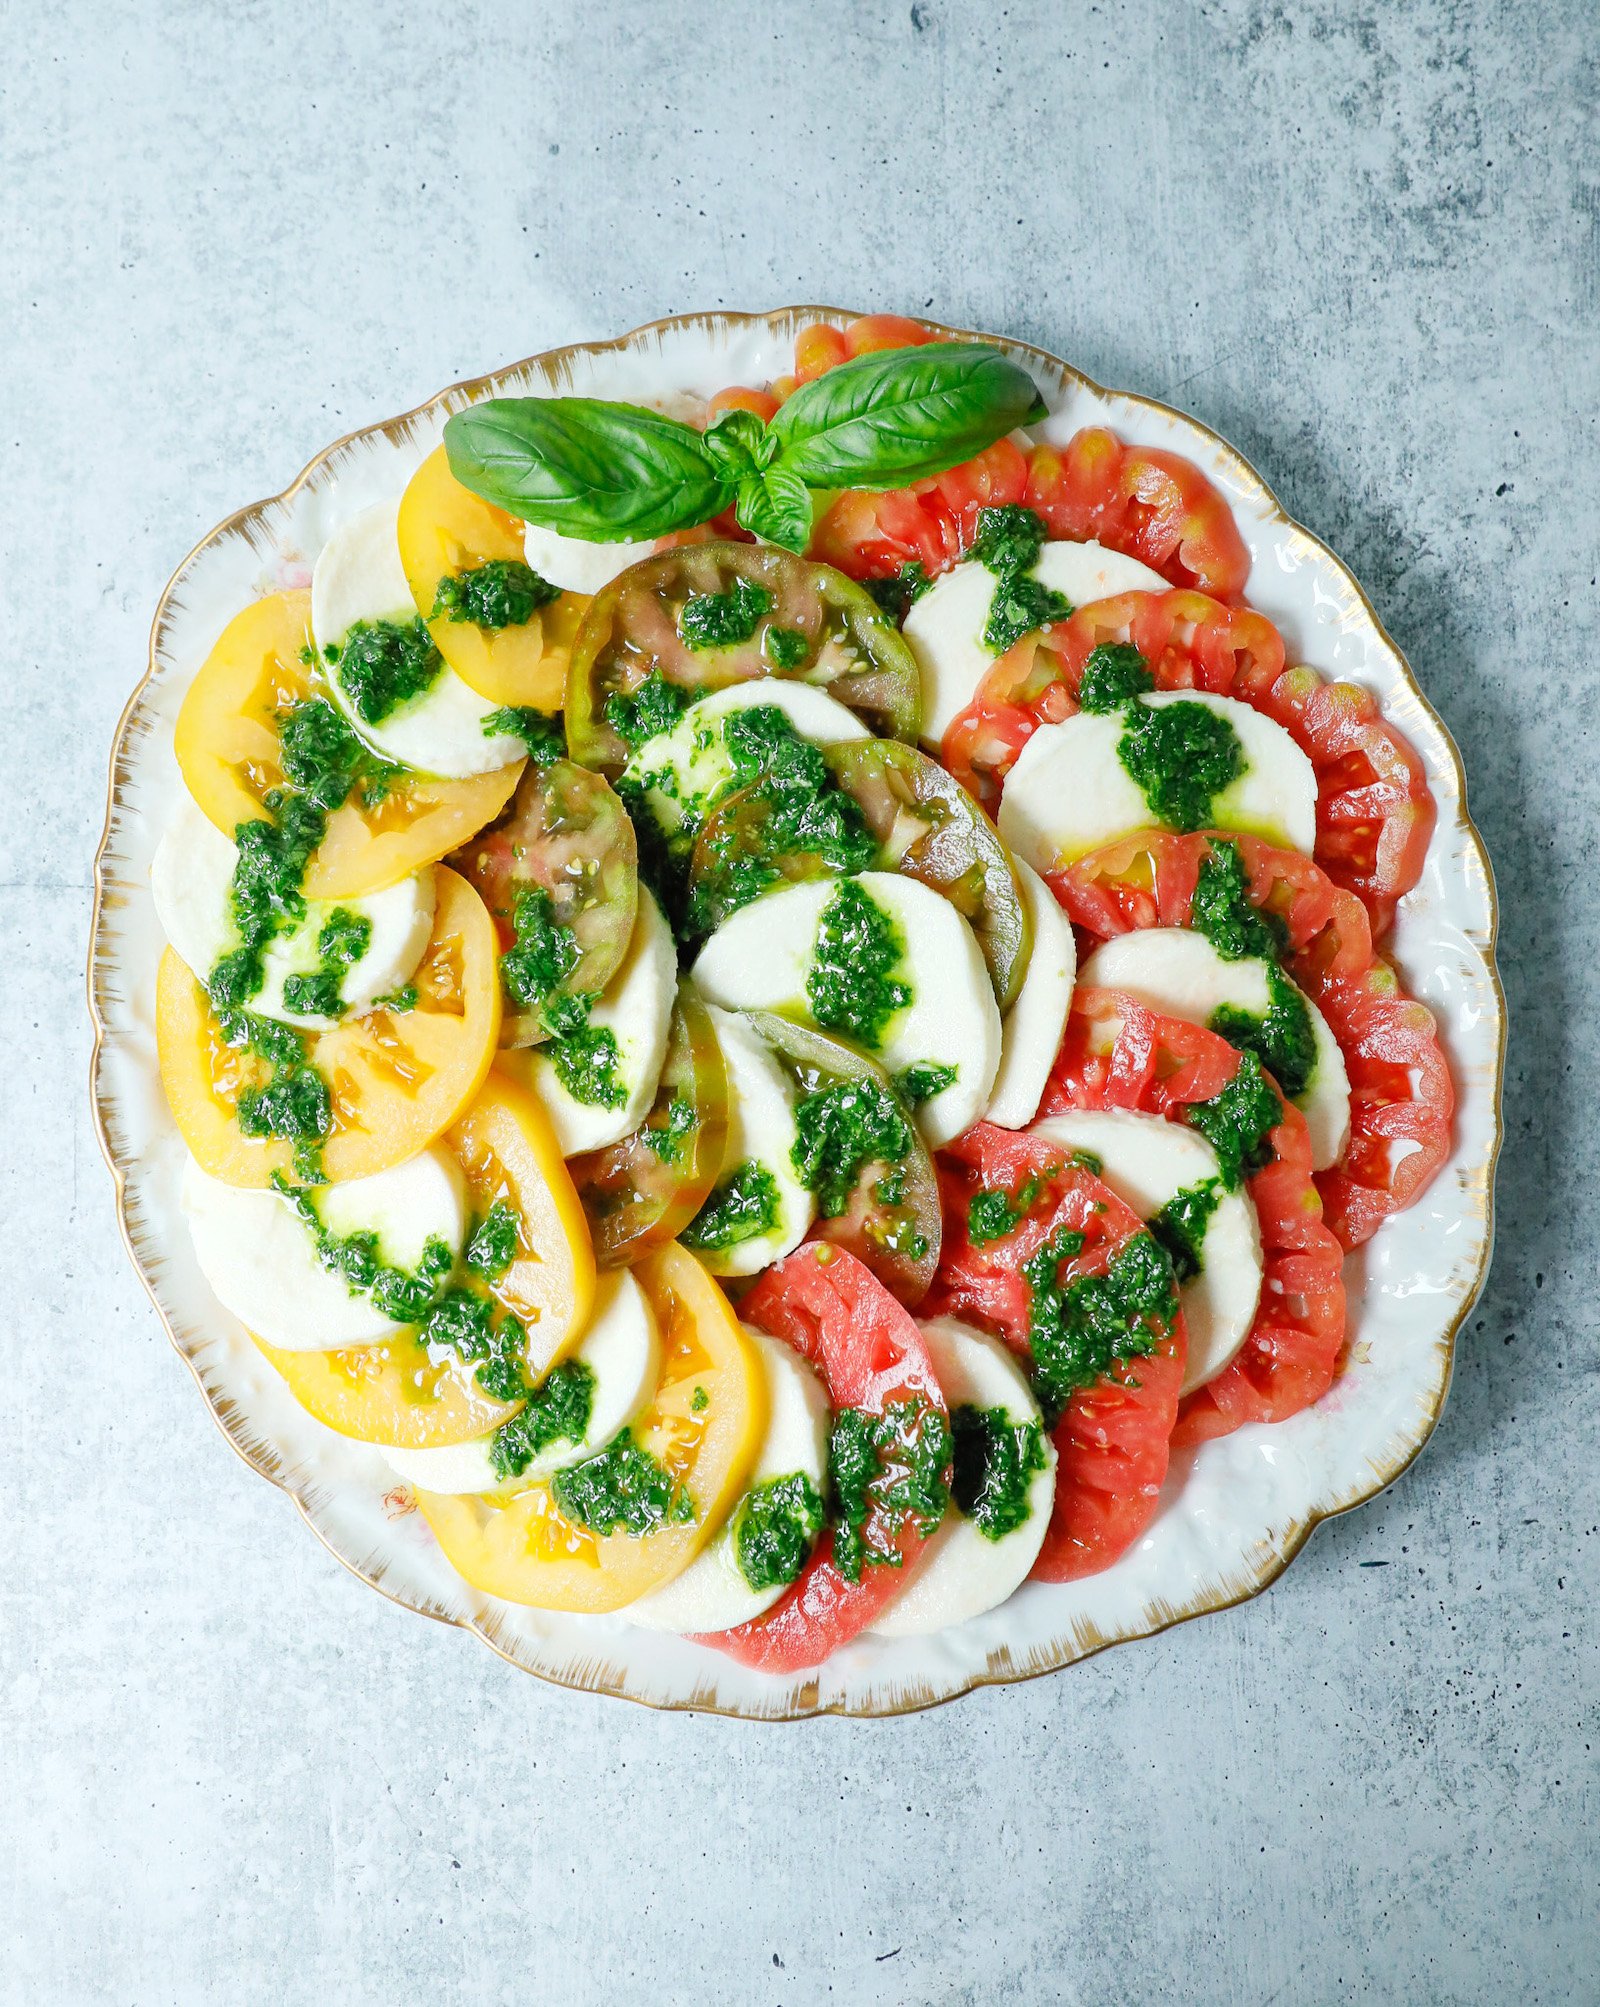 Top view of a caprese salad using green, yellow and red tomatoes on a round platter.